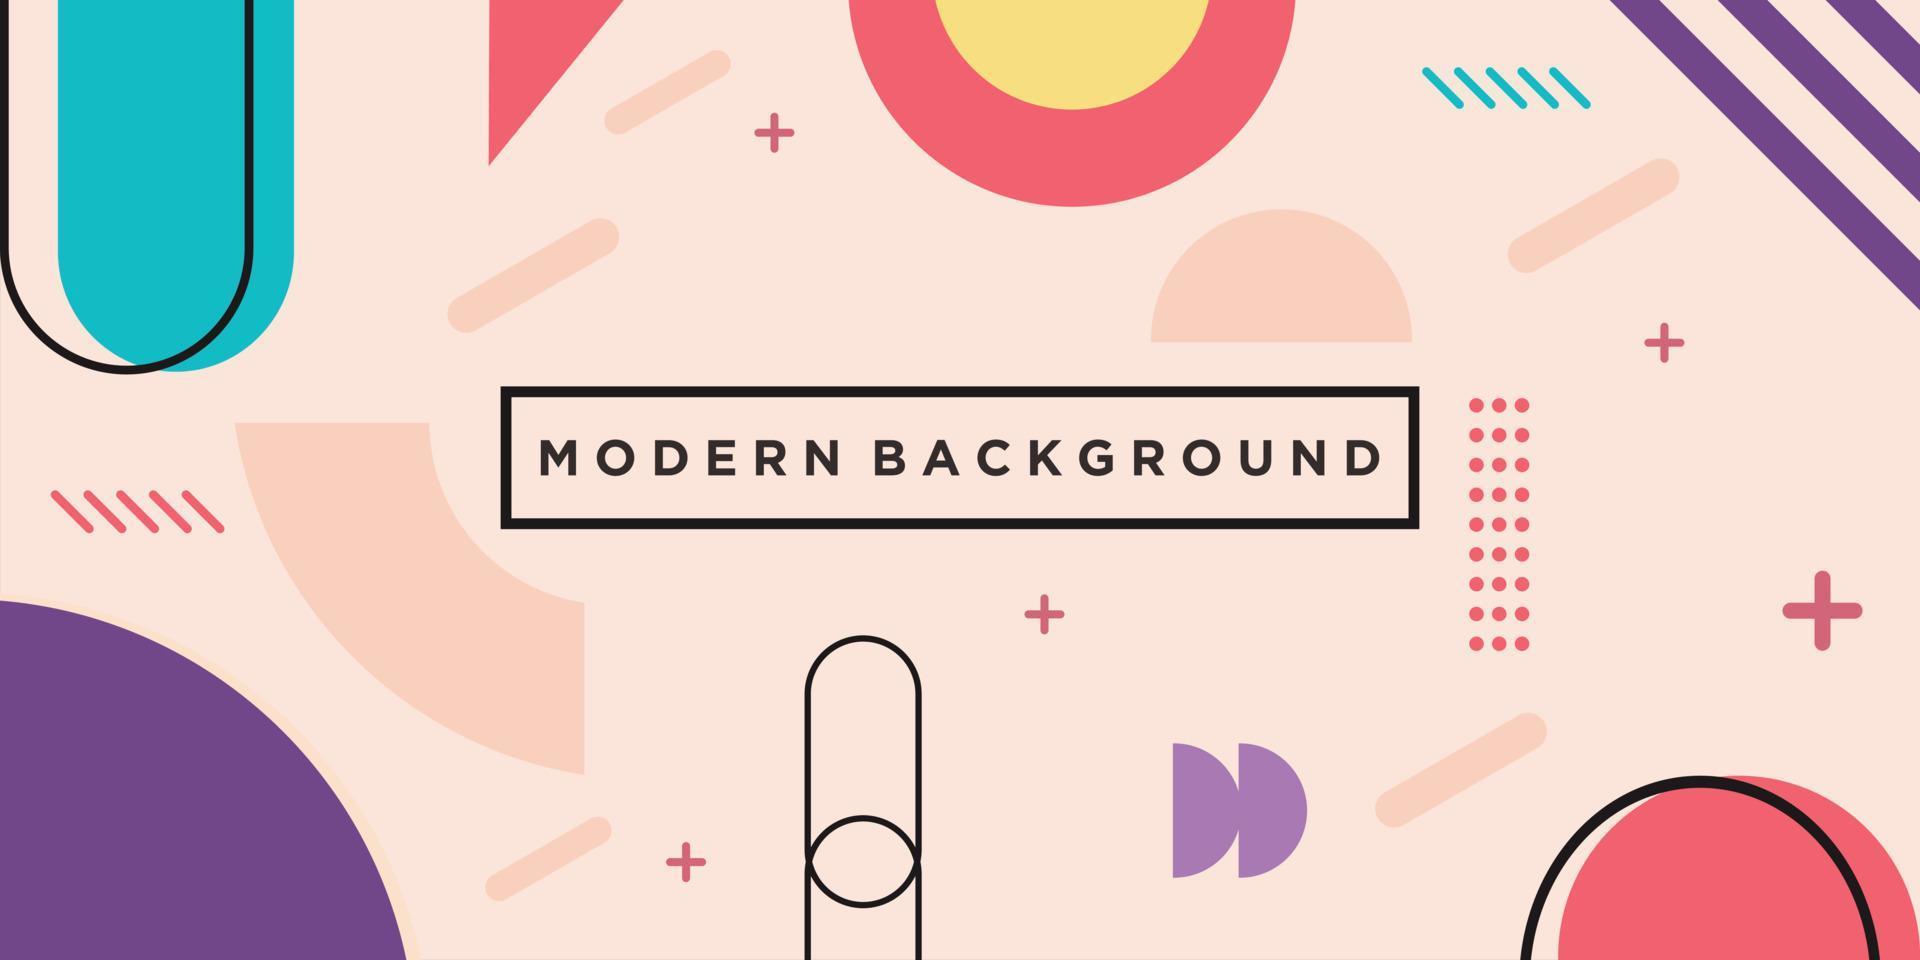 Abstract memphis geometric background layout cover design vector